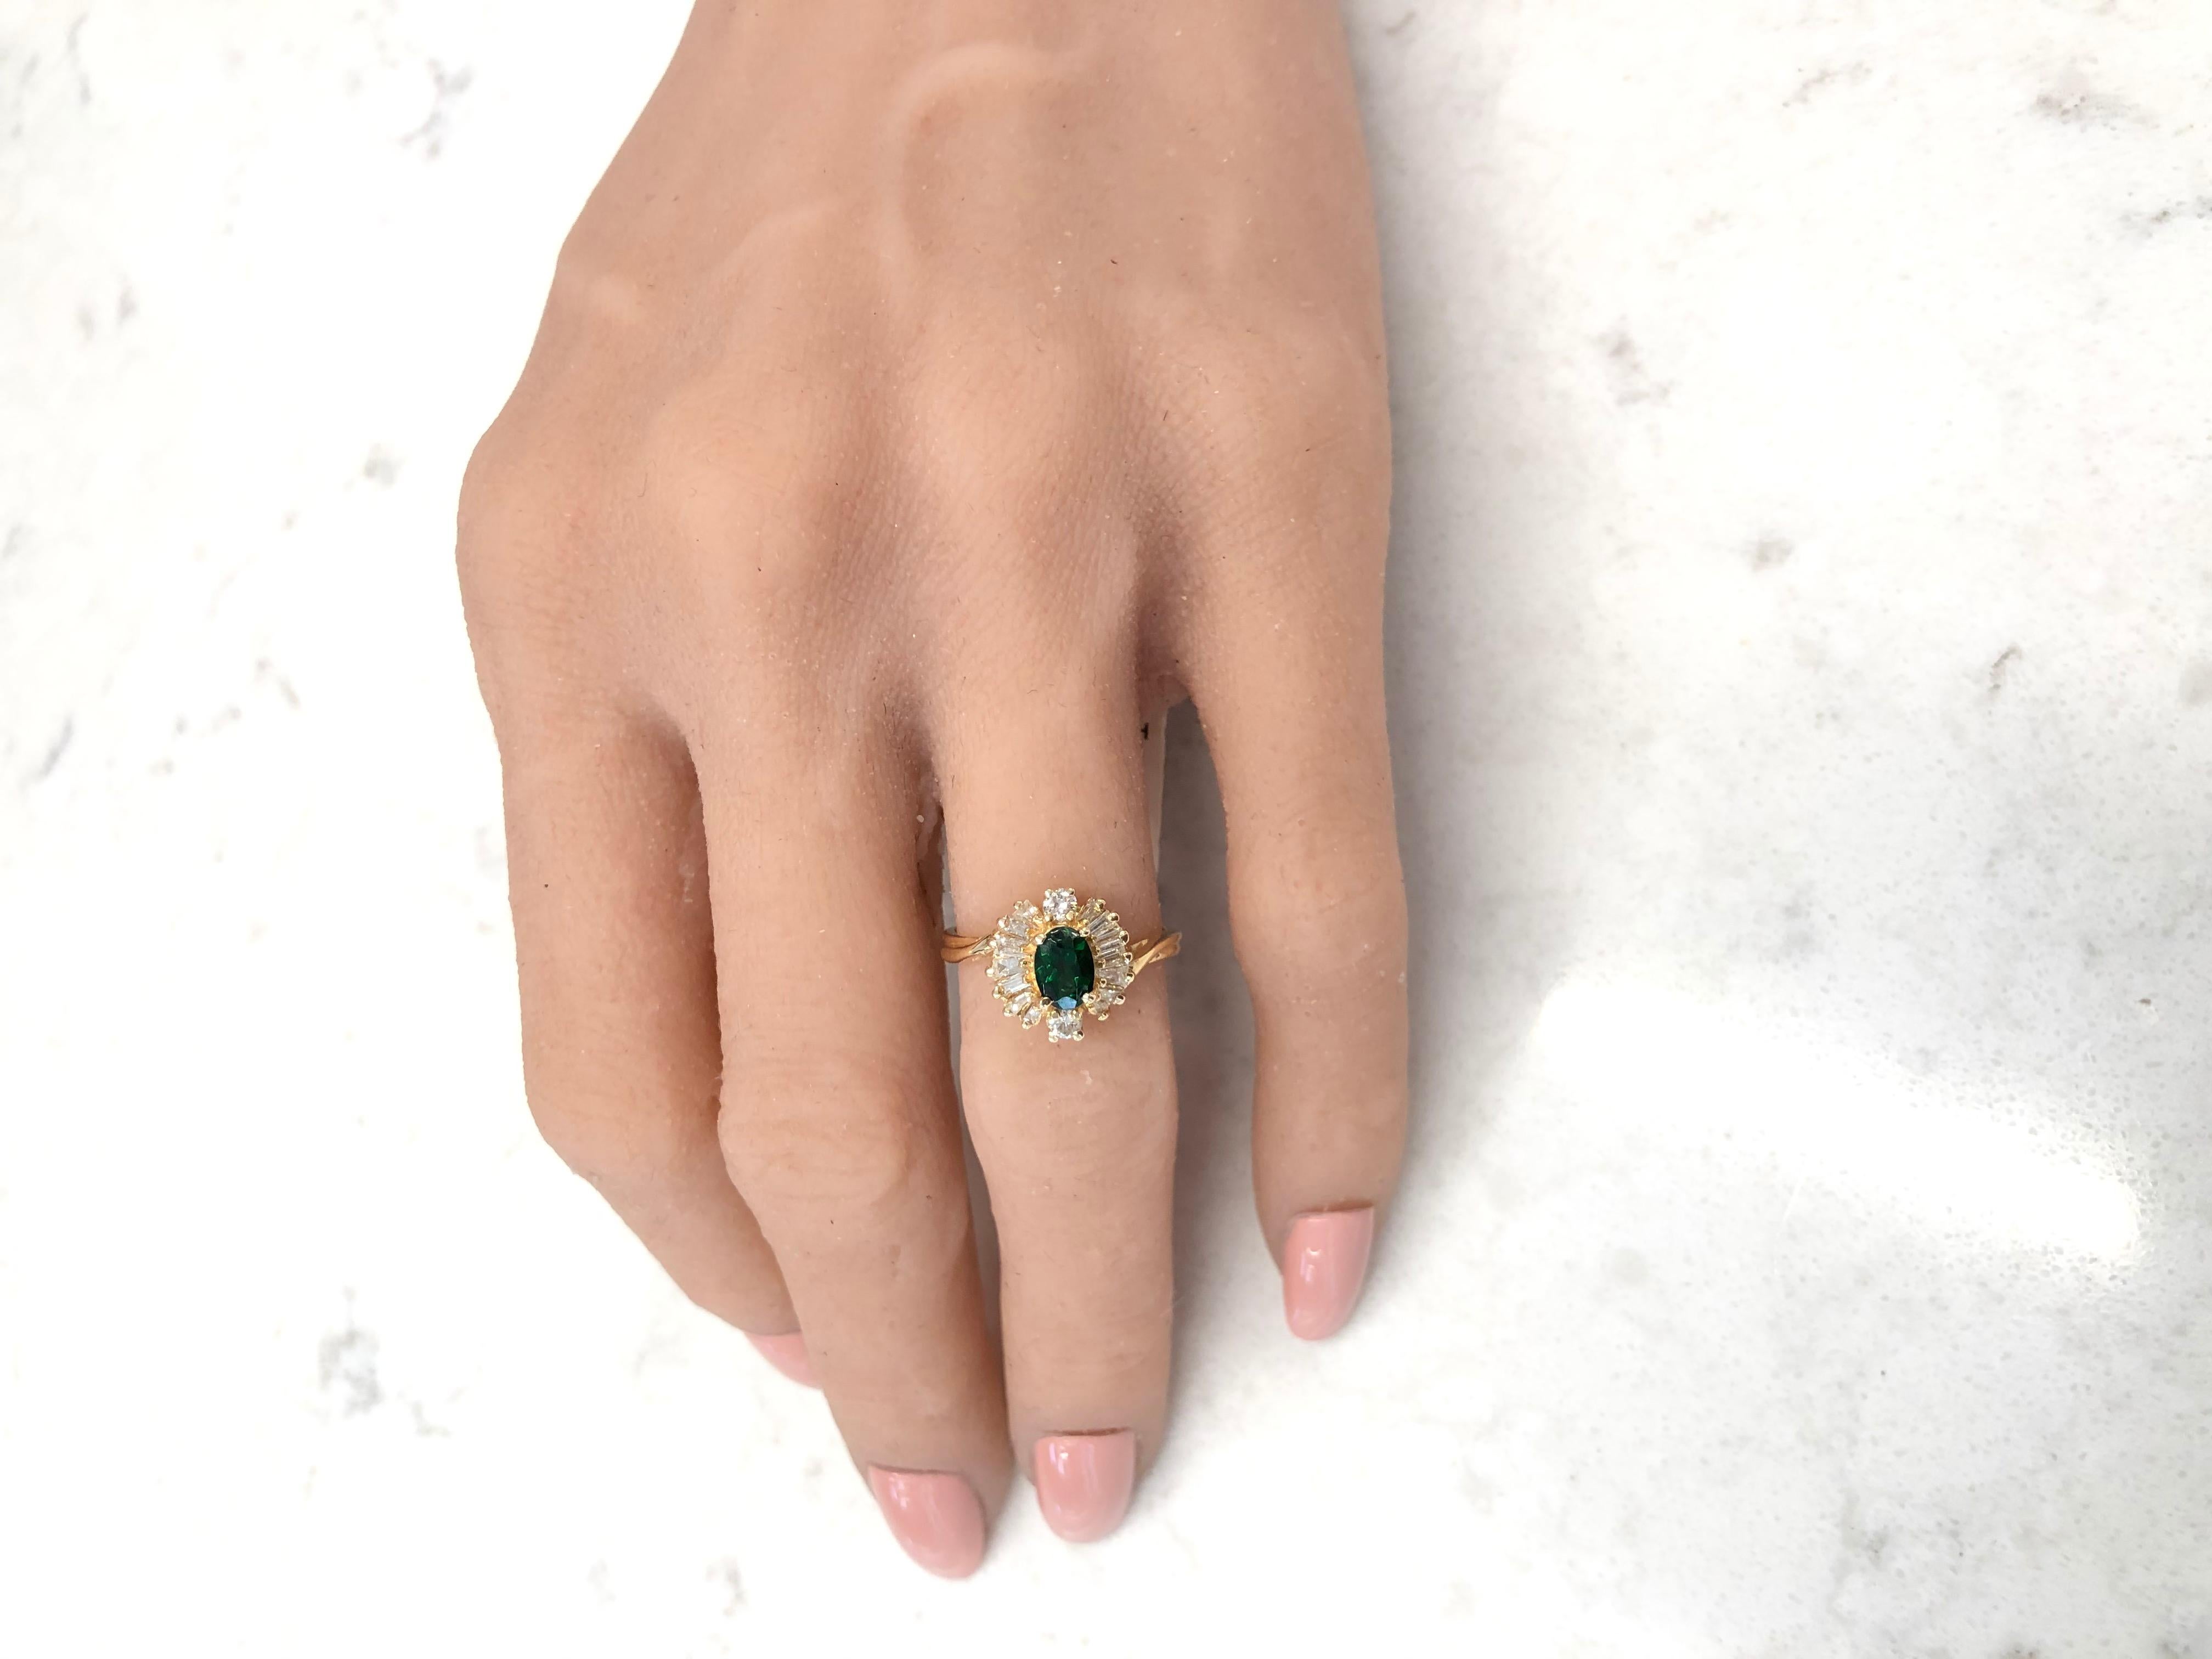 This incredible cocktail ring displays natural color and fire in a show-stopping style. Created in brightly polished 14 karat yellow gold, this beautiful ring features a 0.58 carat tsavorite garnet center stone that exhibits a green hue,